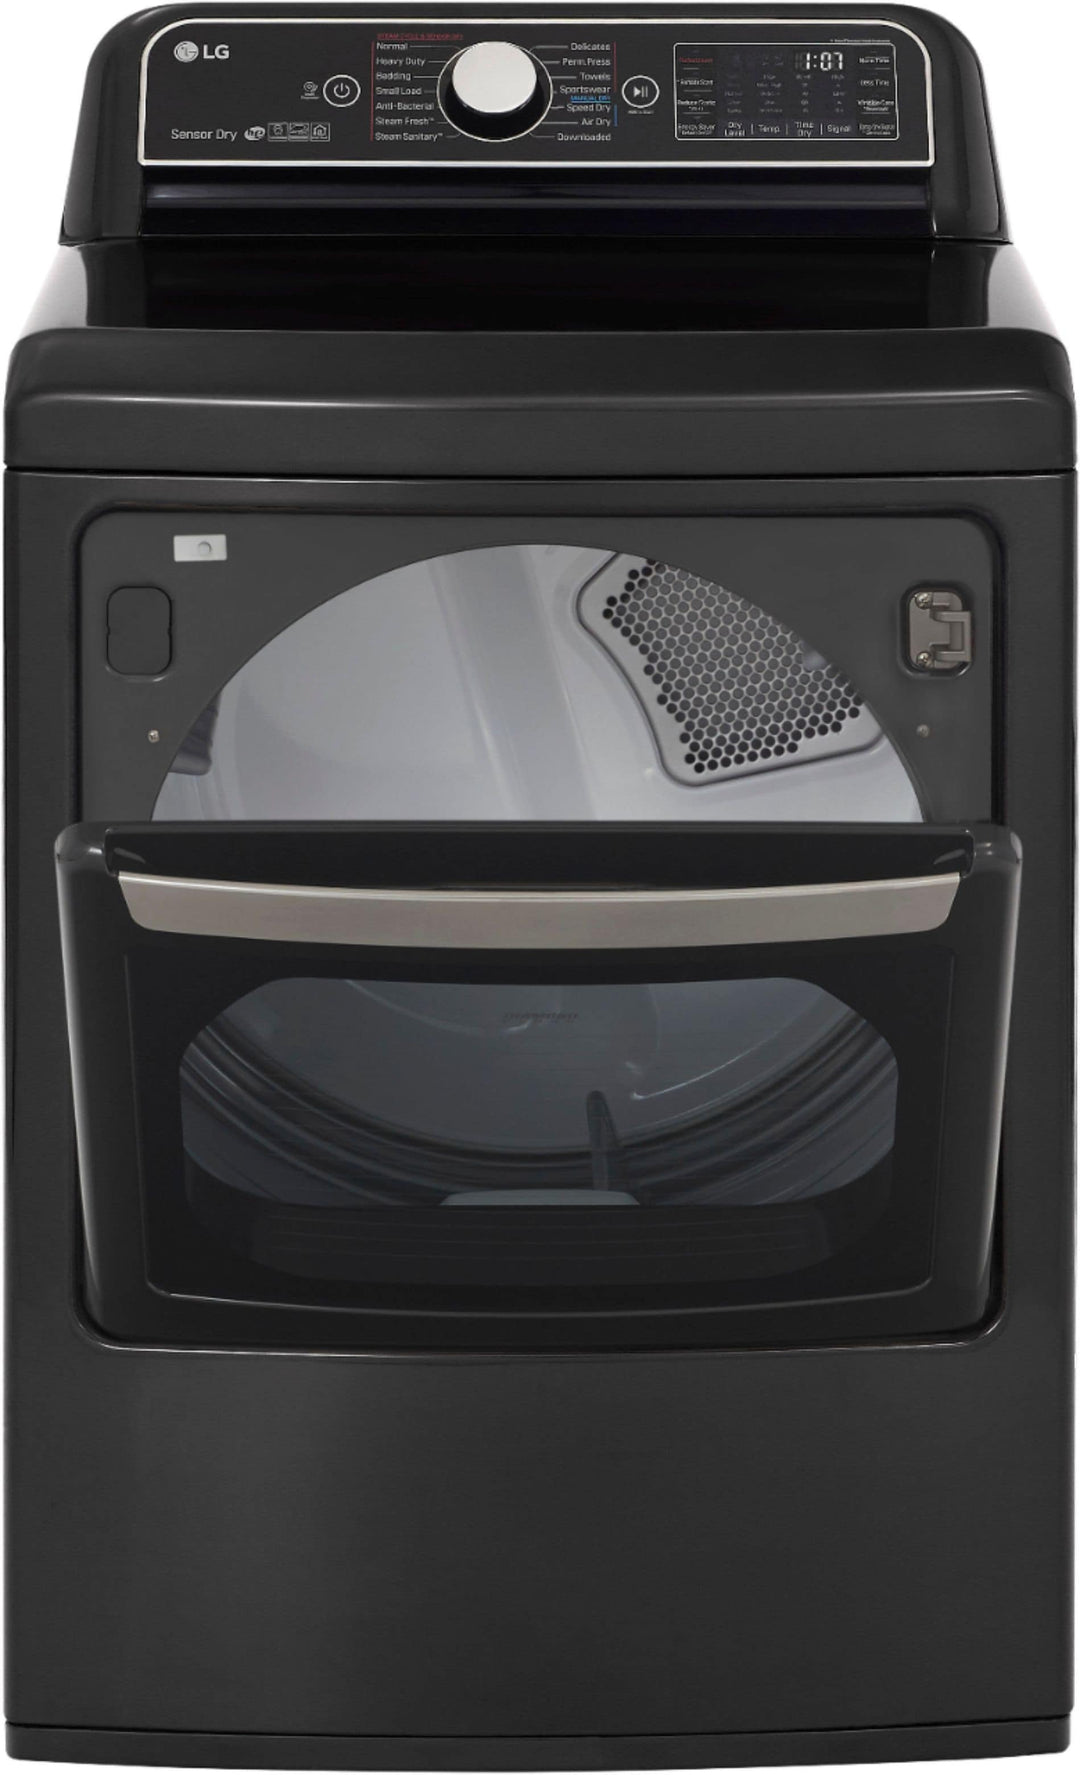 LG - 7.3 Cu. Ft. Smart Electric Dryer with Steam and Sensor Dry - Black steel_15